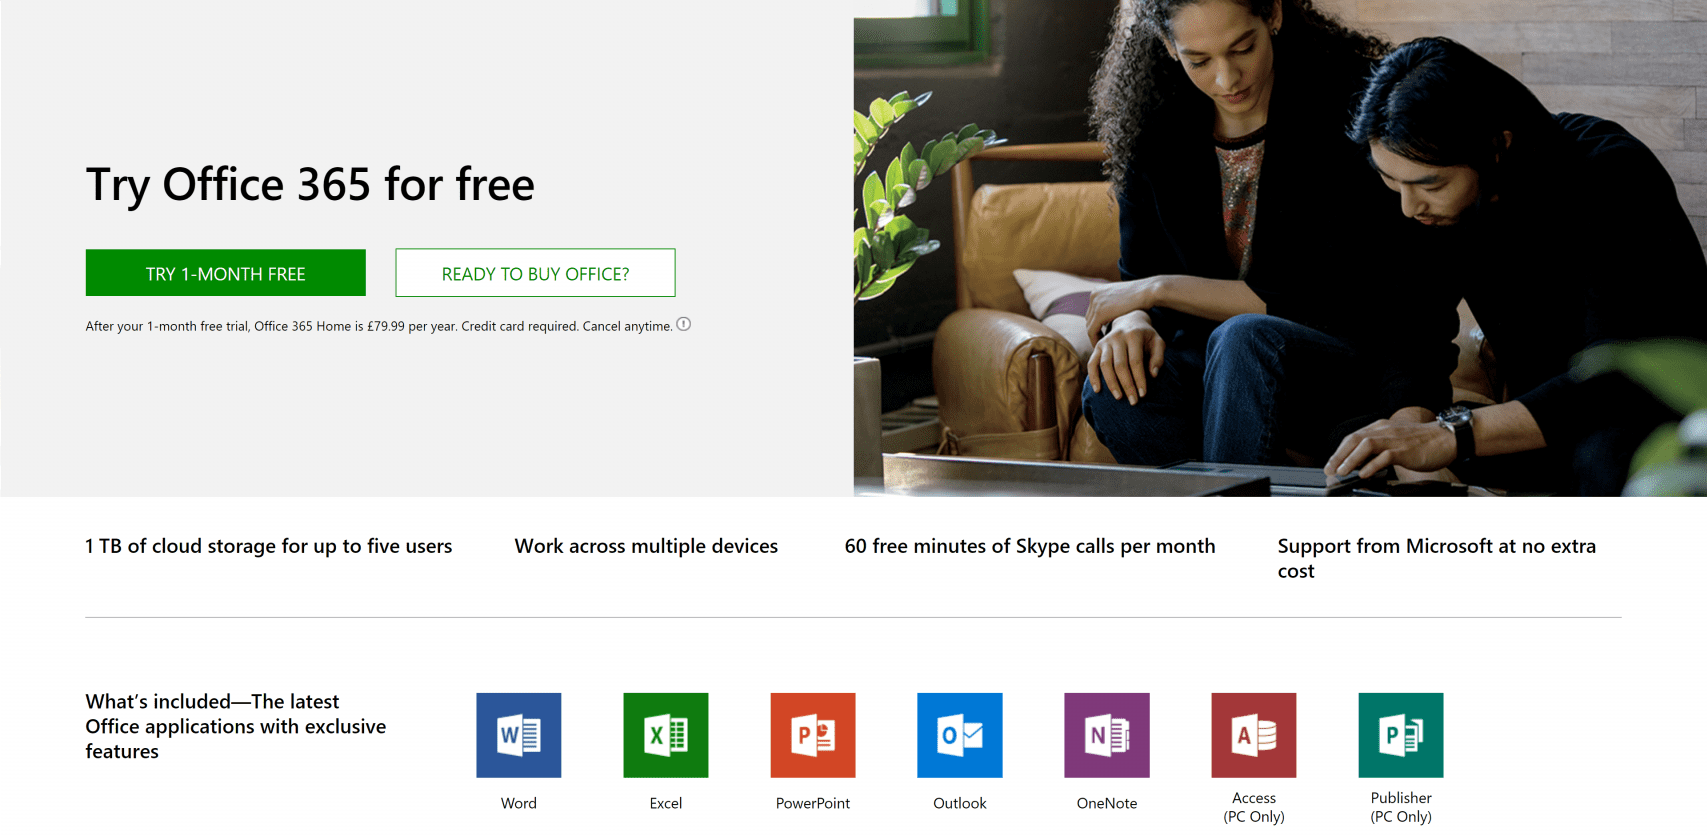 6 ways to get Microsoft Office for free - Office 365 Trial. Microsoft Office Free Download